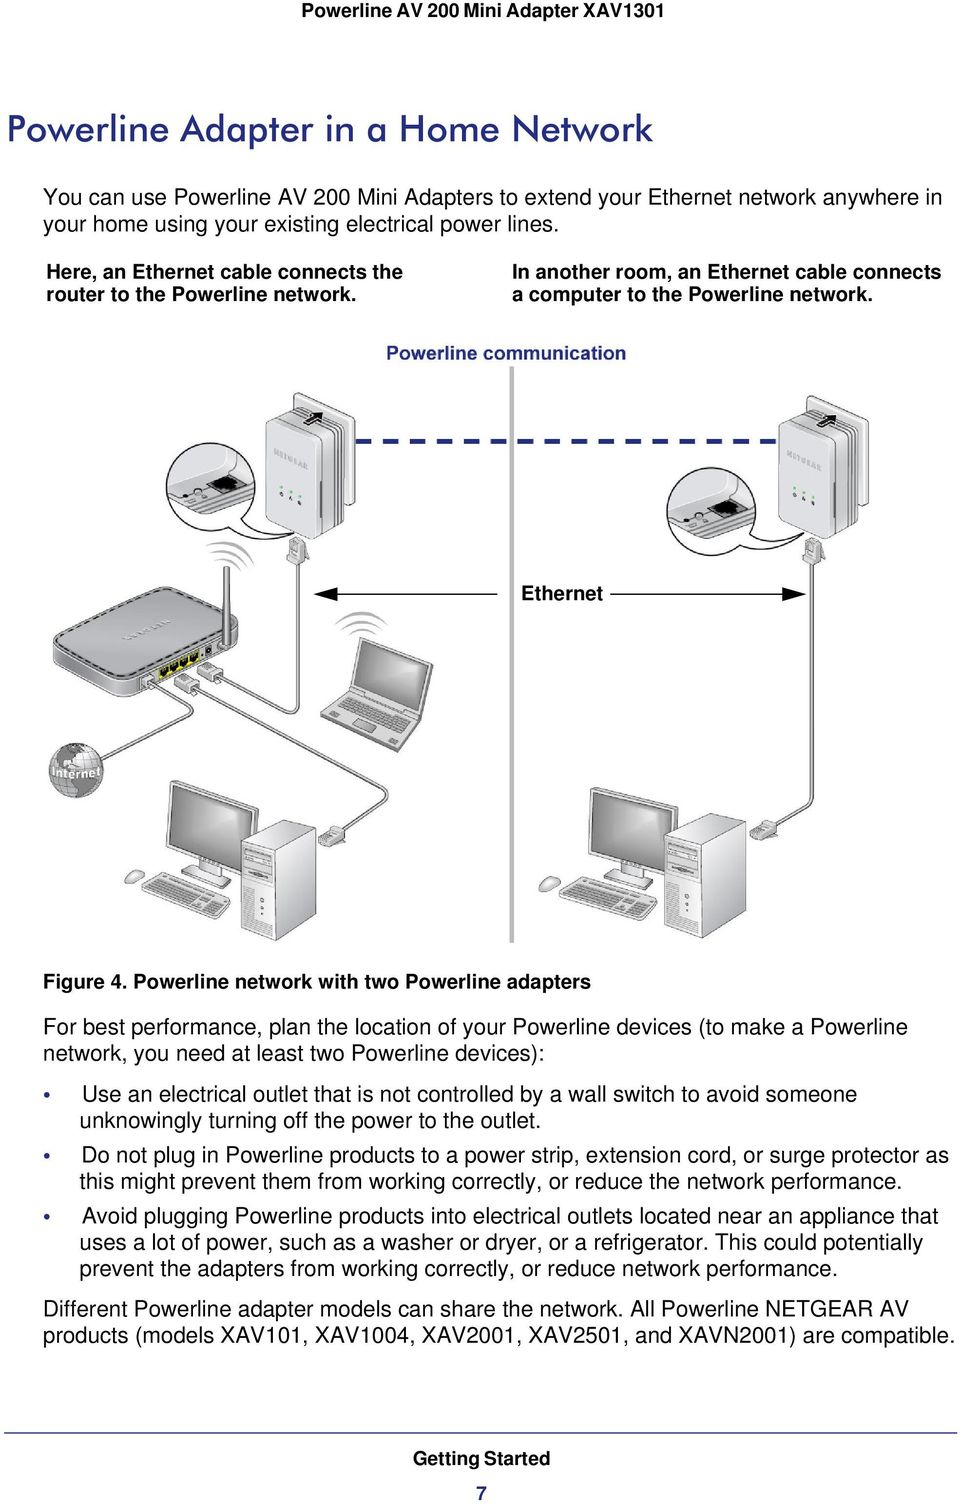 Powerline network with two Powerline adapters For best performance, plan the location of your Powerline devices (to make a Powerline network, you need at least two Powerline devices): Use an